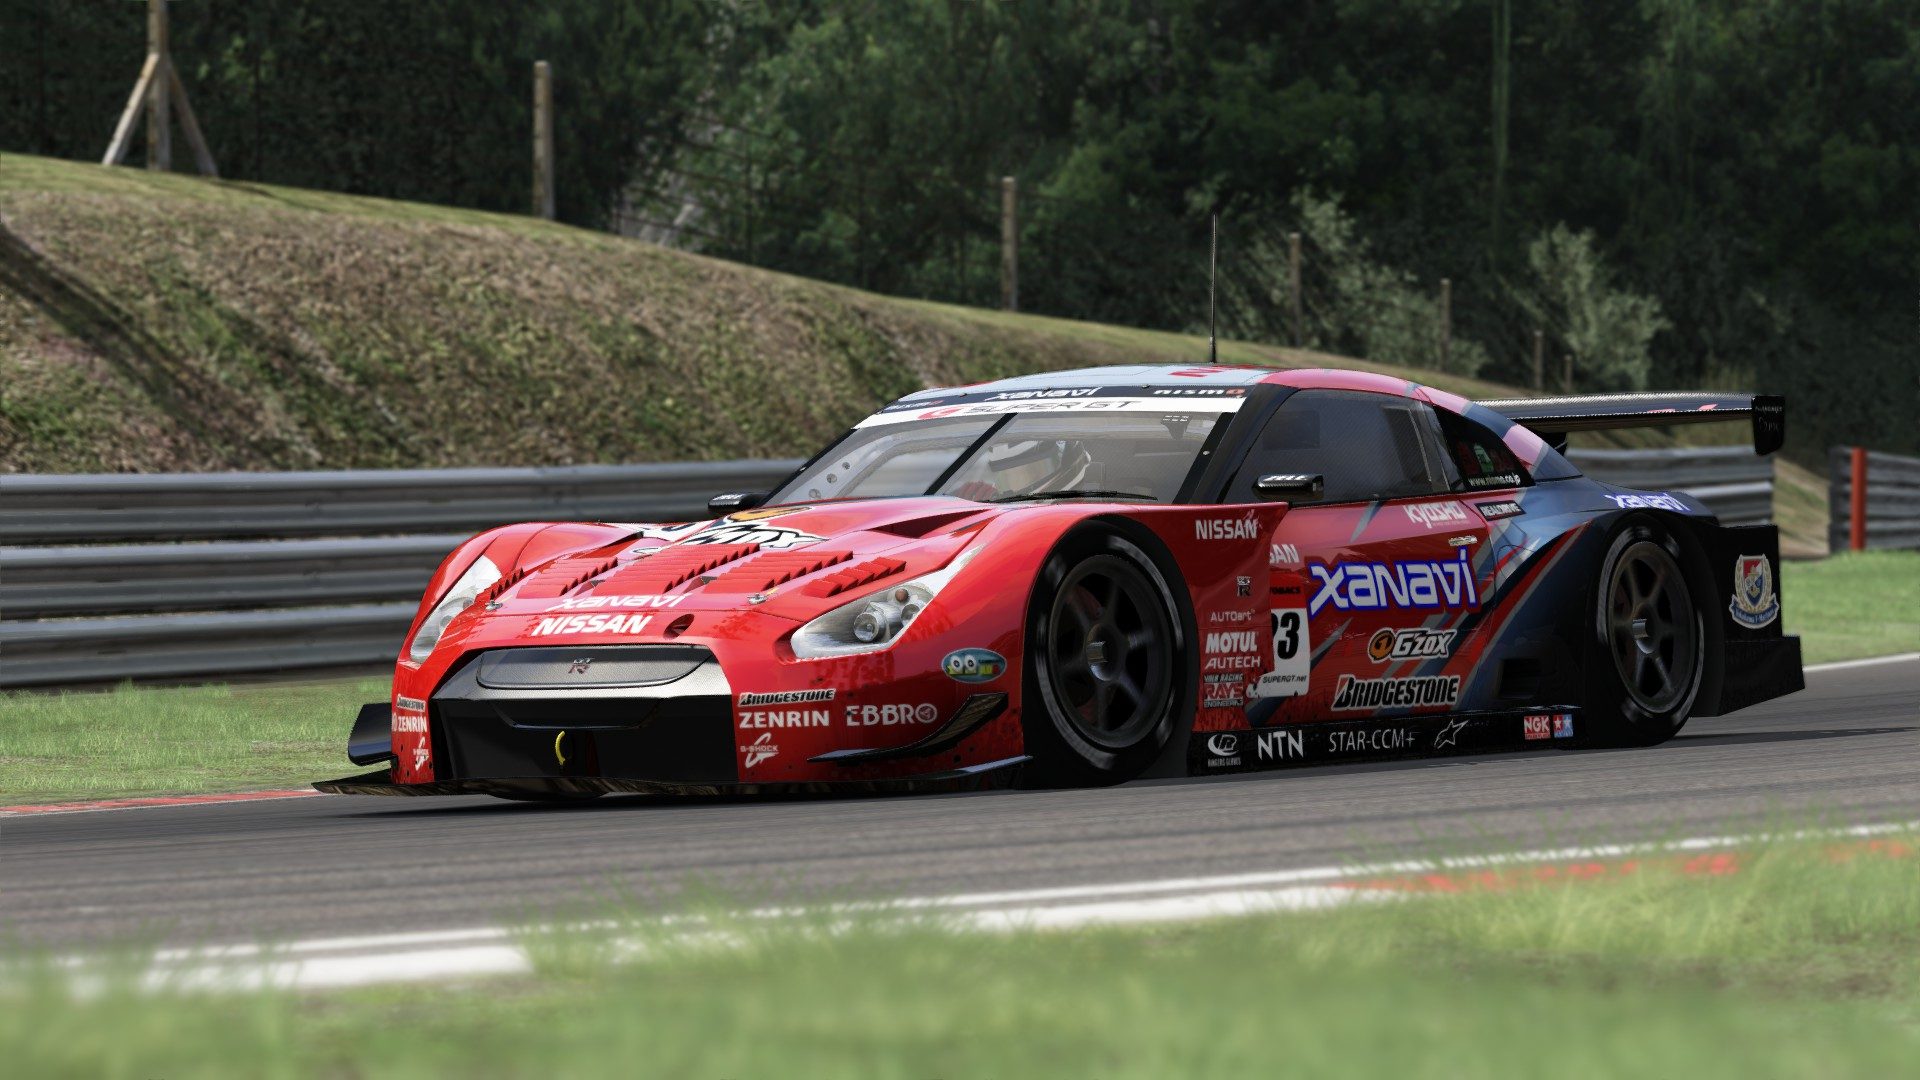 Download Assetto Corsa free for PC - CCM